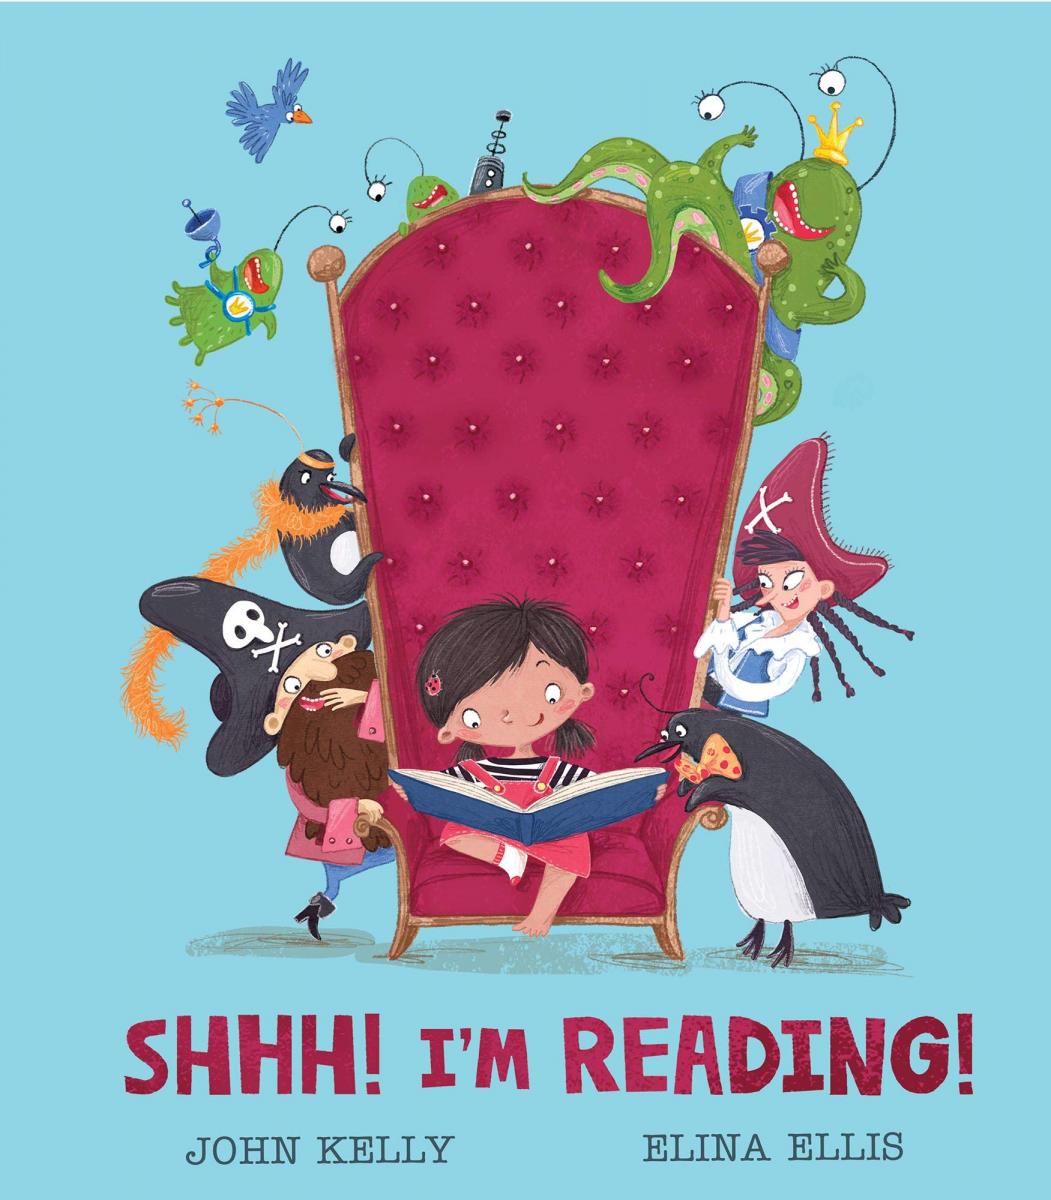 I m not reading these books. Shhh i'm reading. Shhh! I'M reading! By John Kelly, Elina Ellis. Shhh i'm reading картинка с котом. Shhh picture book.